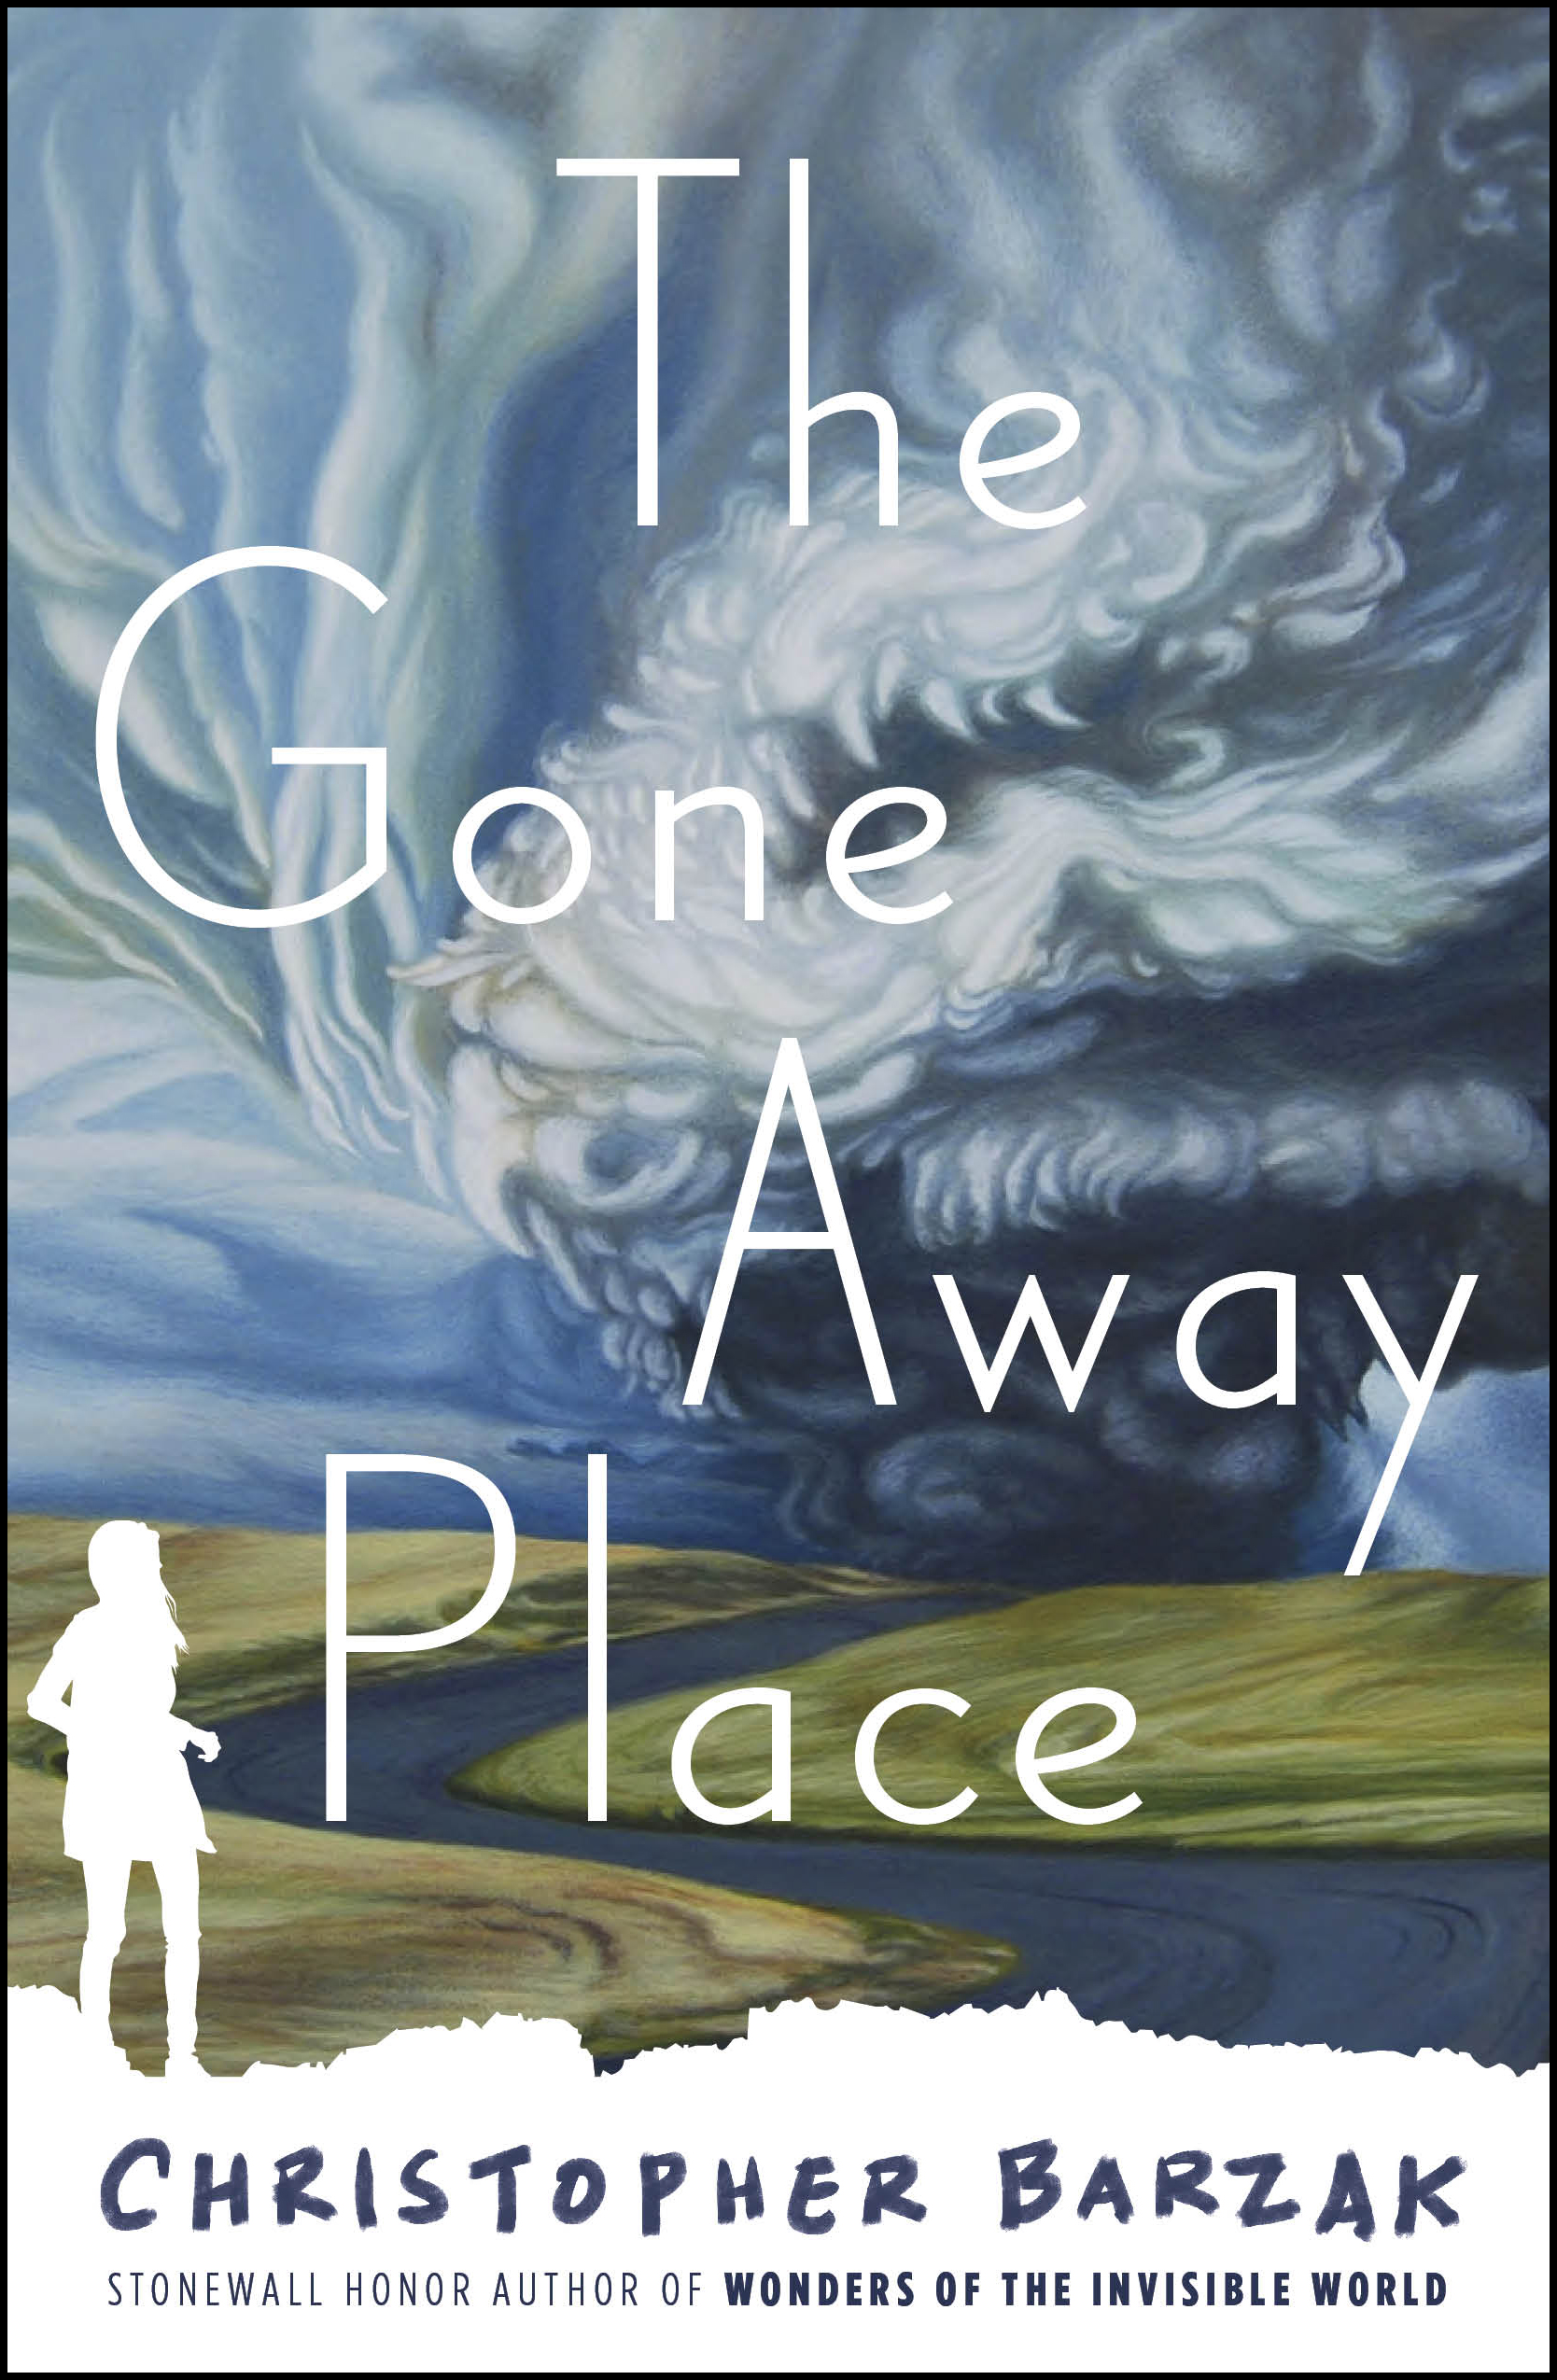 THE GONE AWAY PLACE